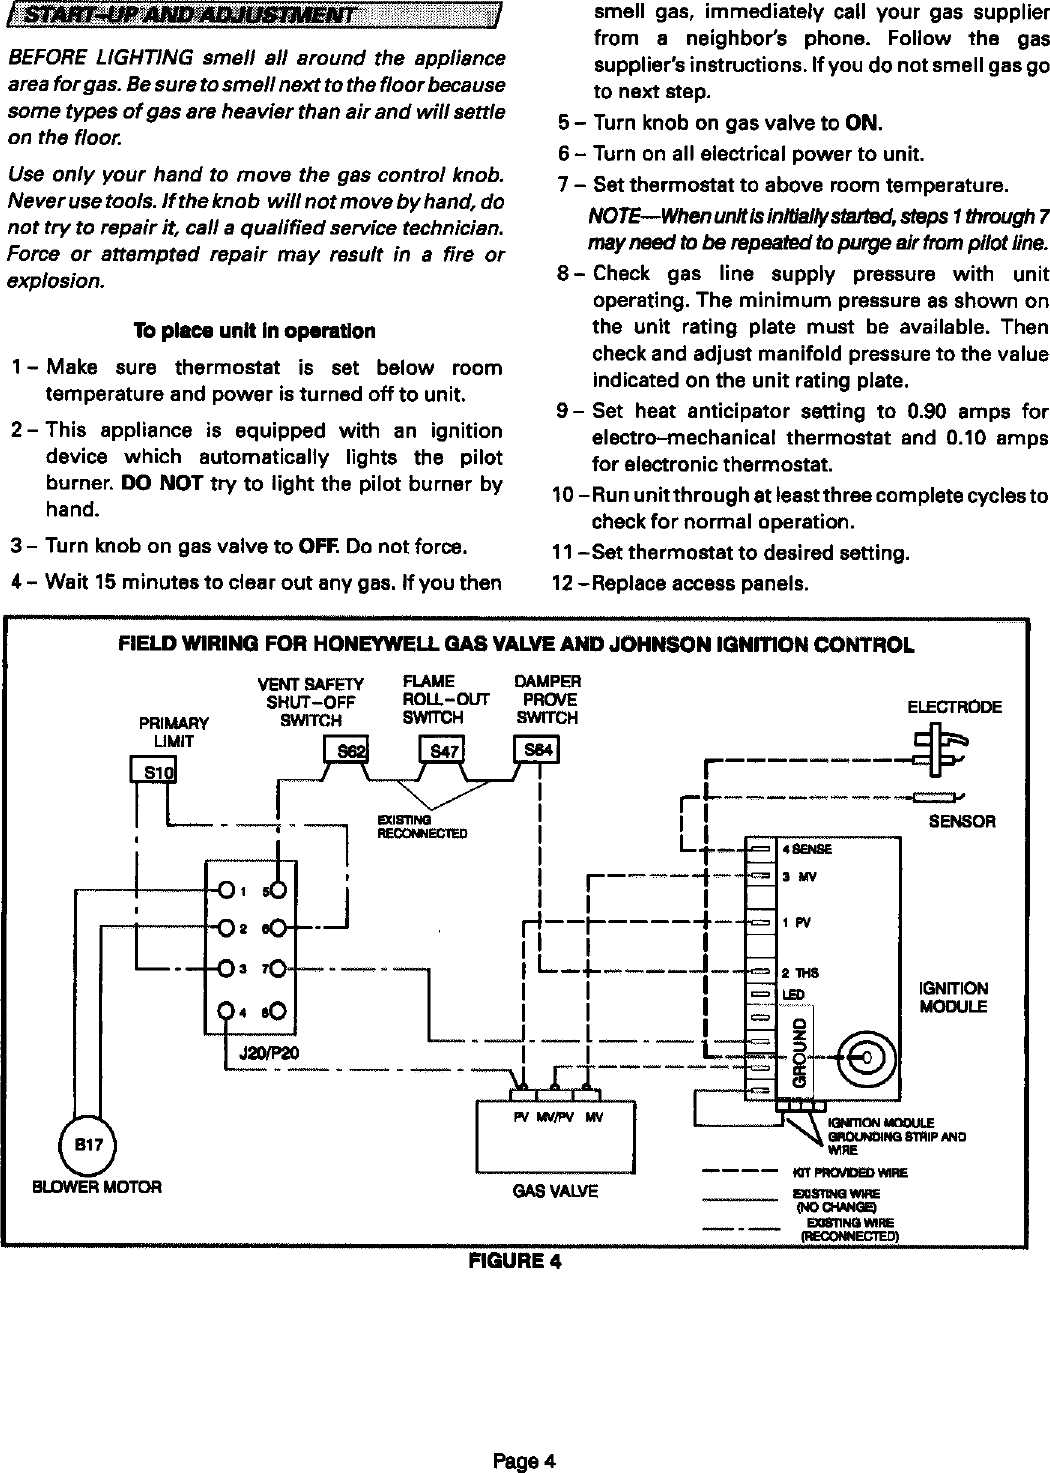 Page 4 of 4 - LENNOX  Furnace/Heater, Gas Manual L0806816